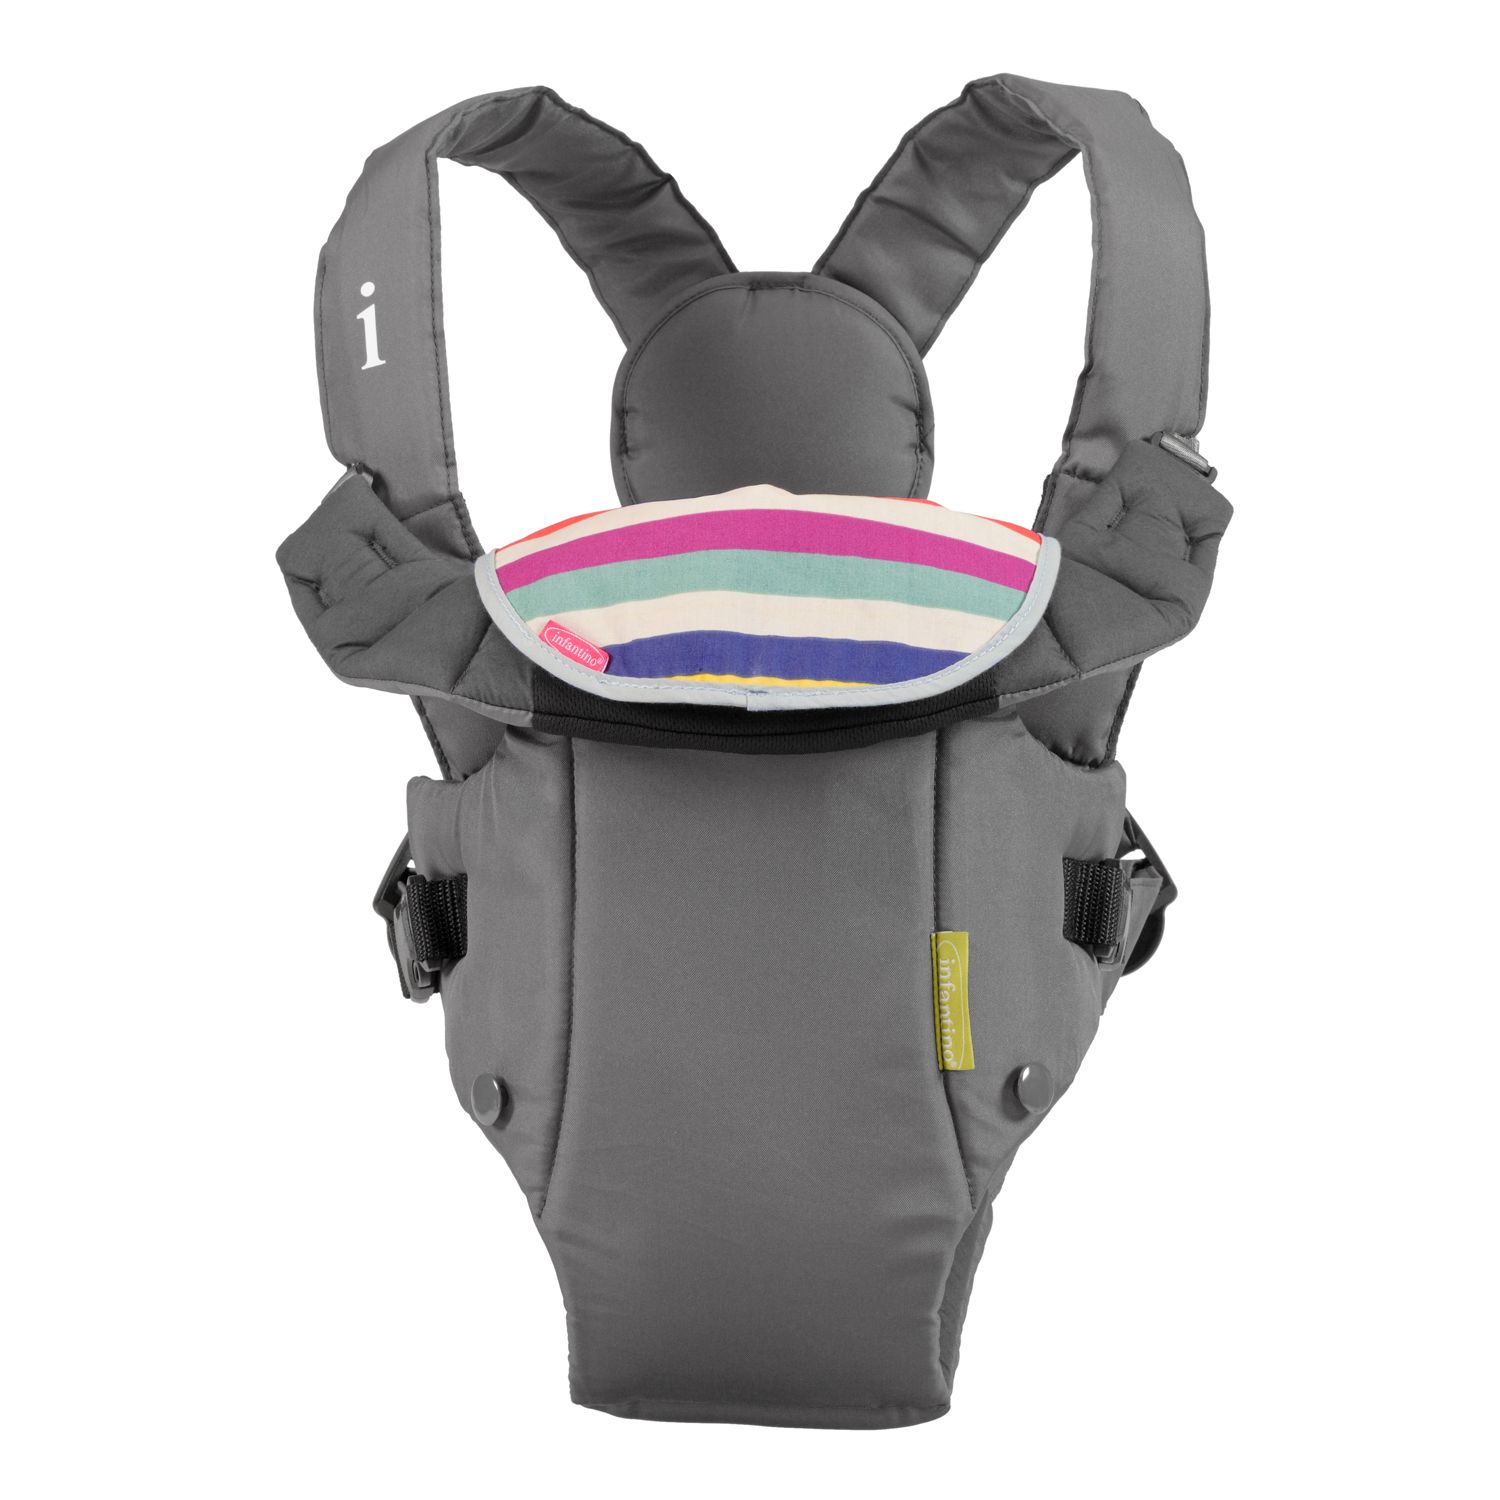 infantino breathe baby carrier